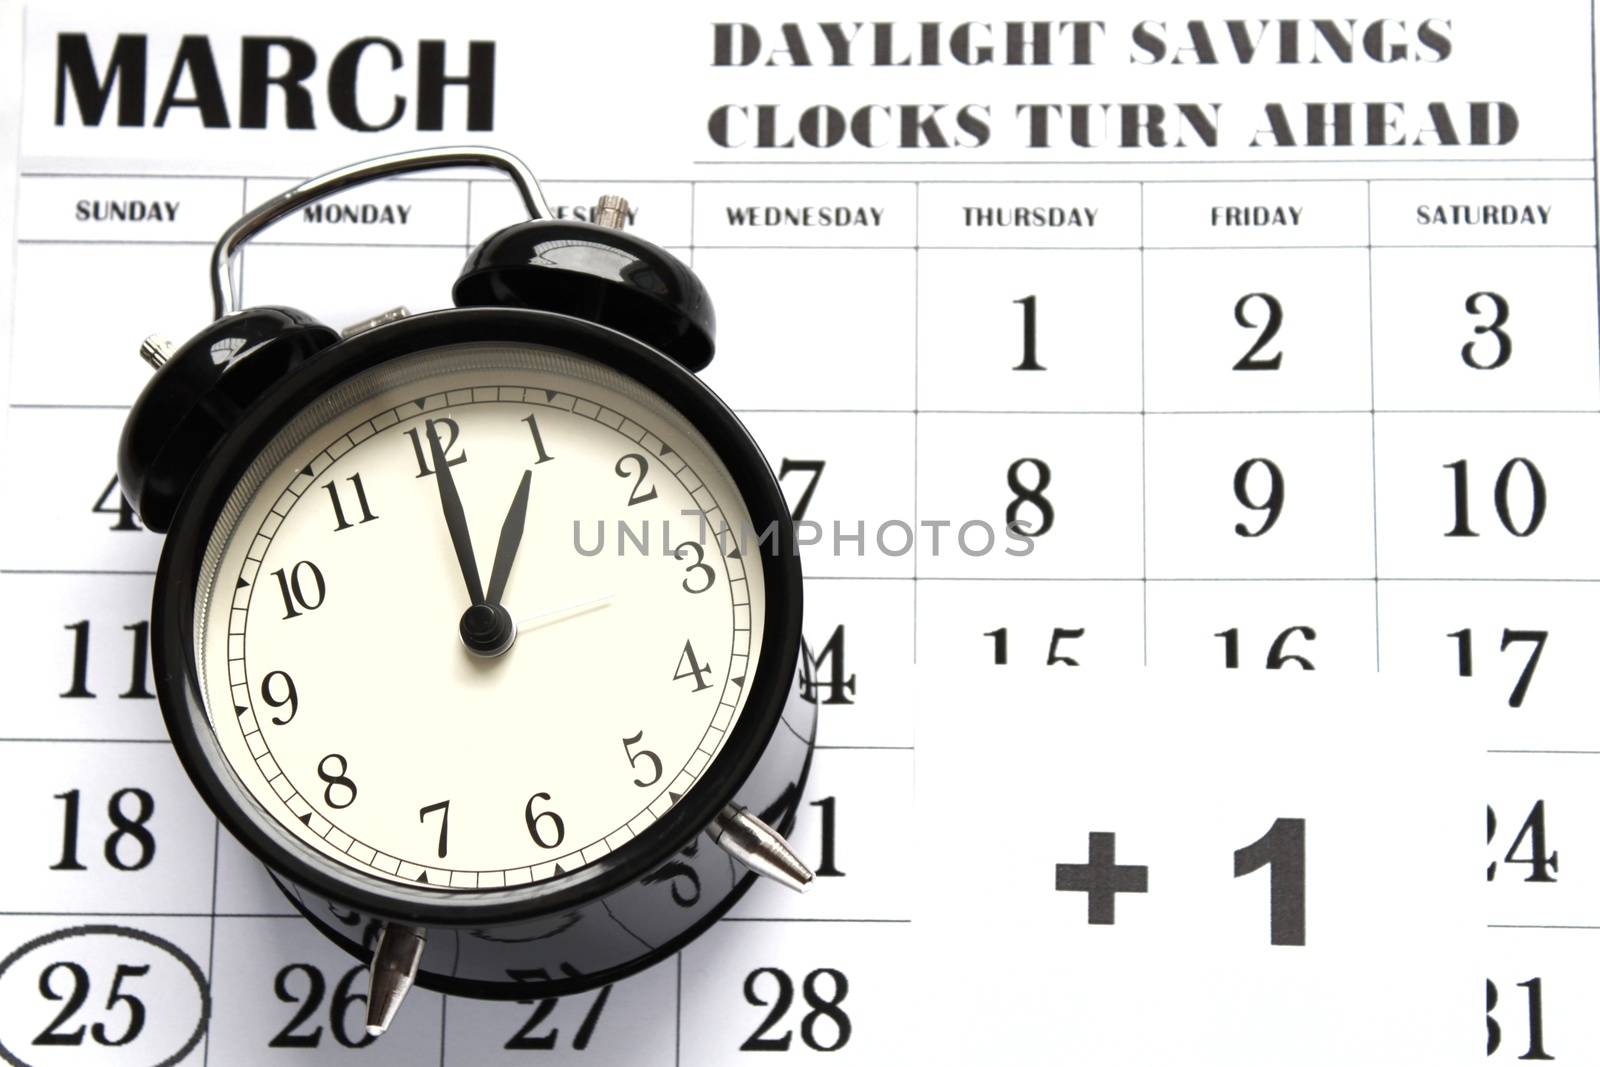 Daylight Savings Spring Forward sunday at 1:00 a.m. March 25 date indicated in the calendar.